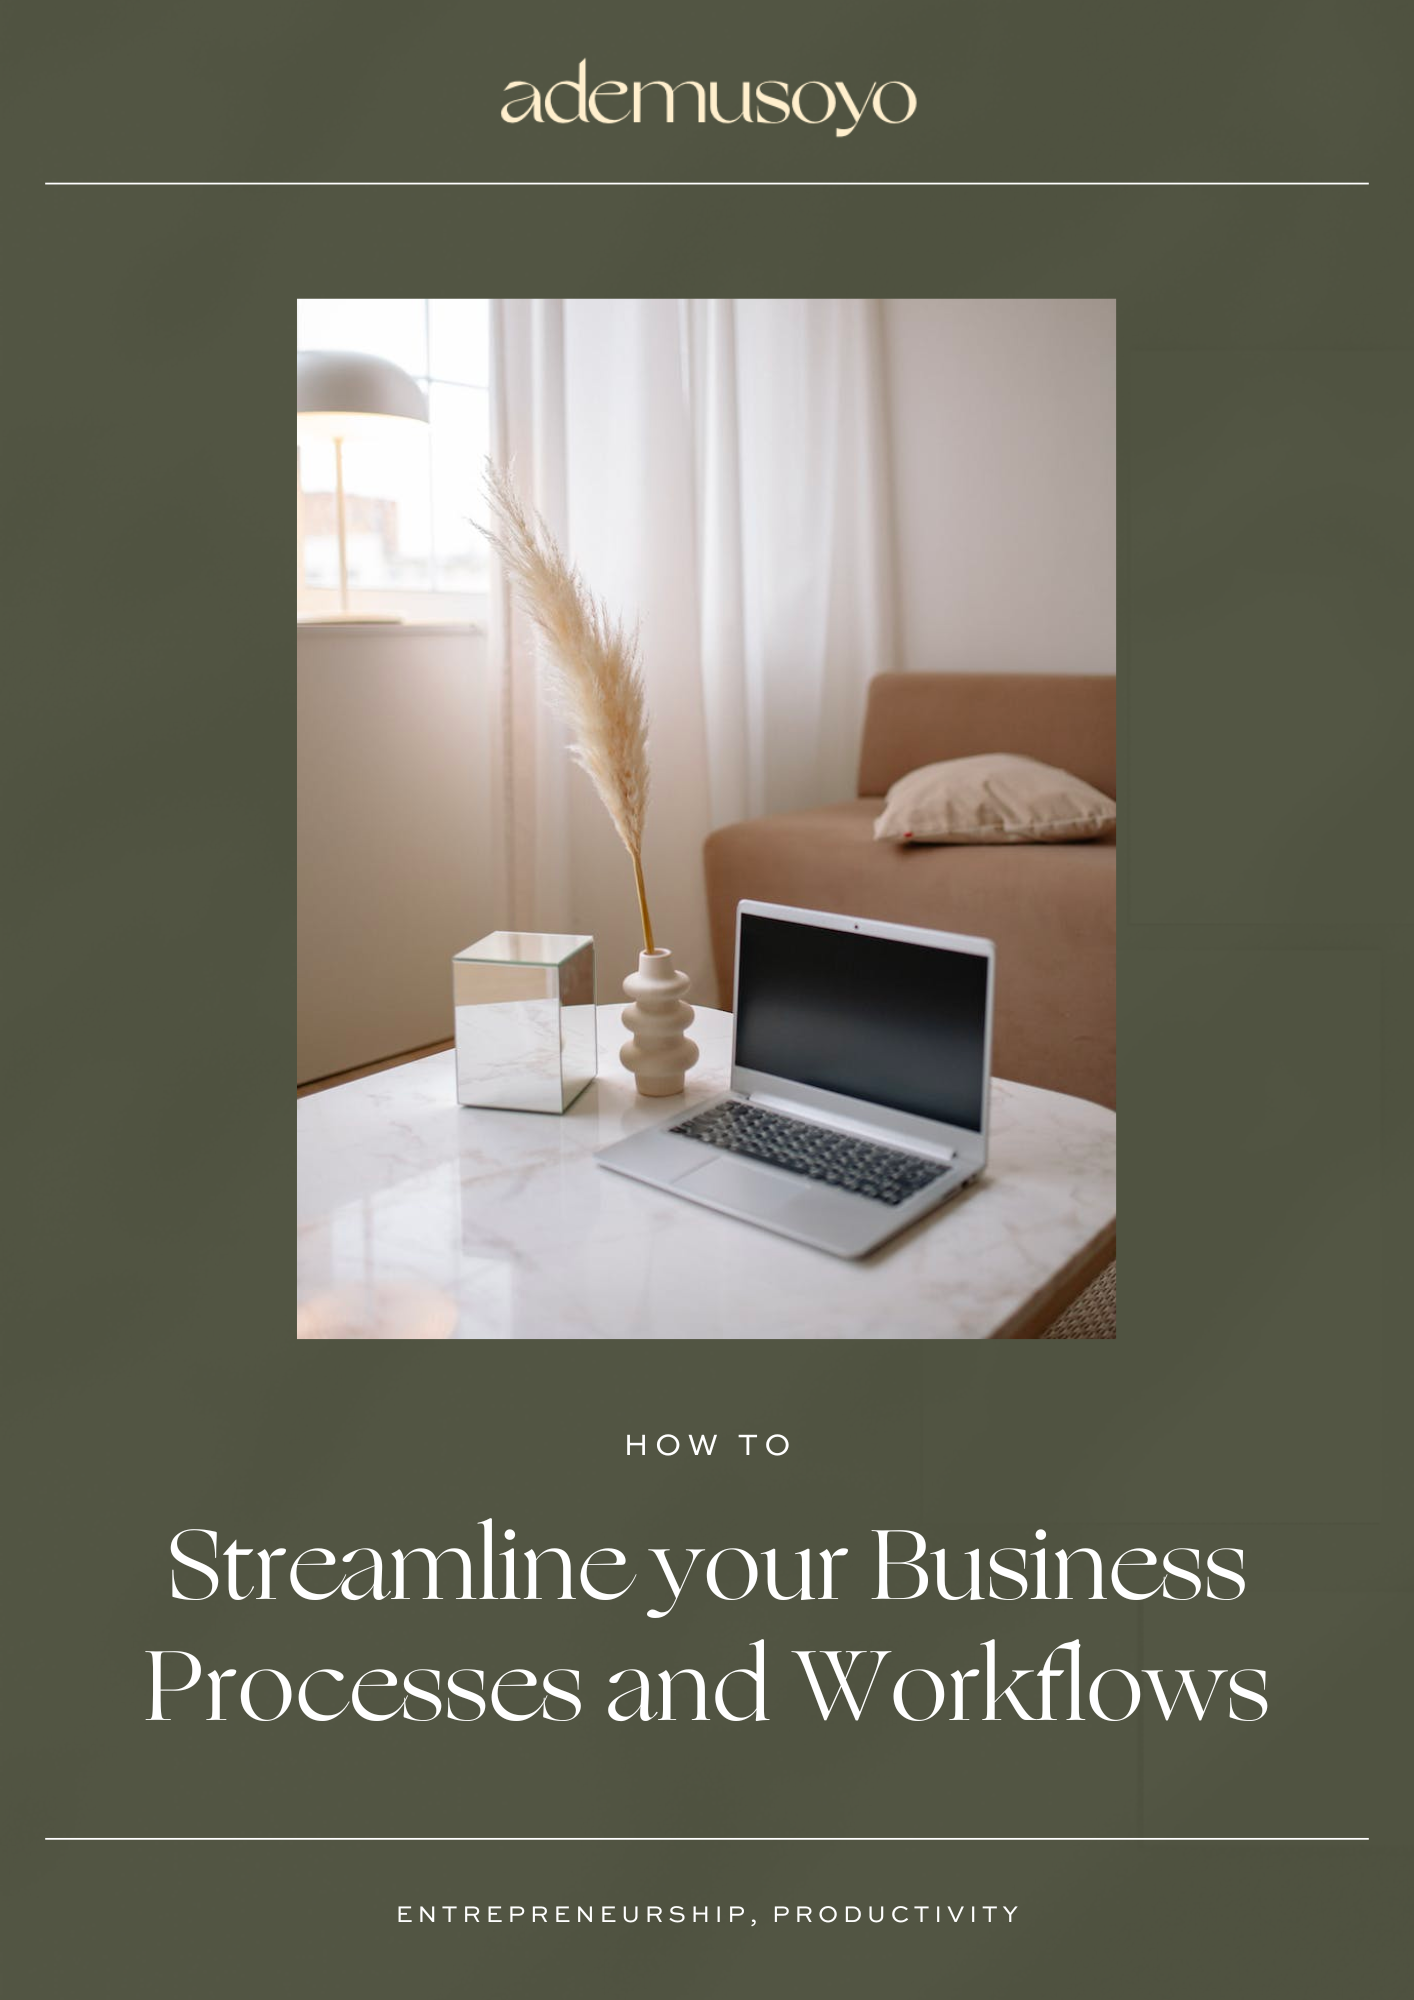 how to streamline business processes and workflows, streamlining business processes, business process management, business process automation